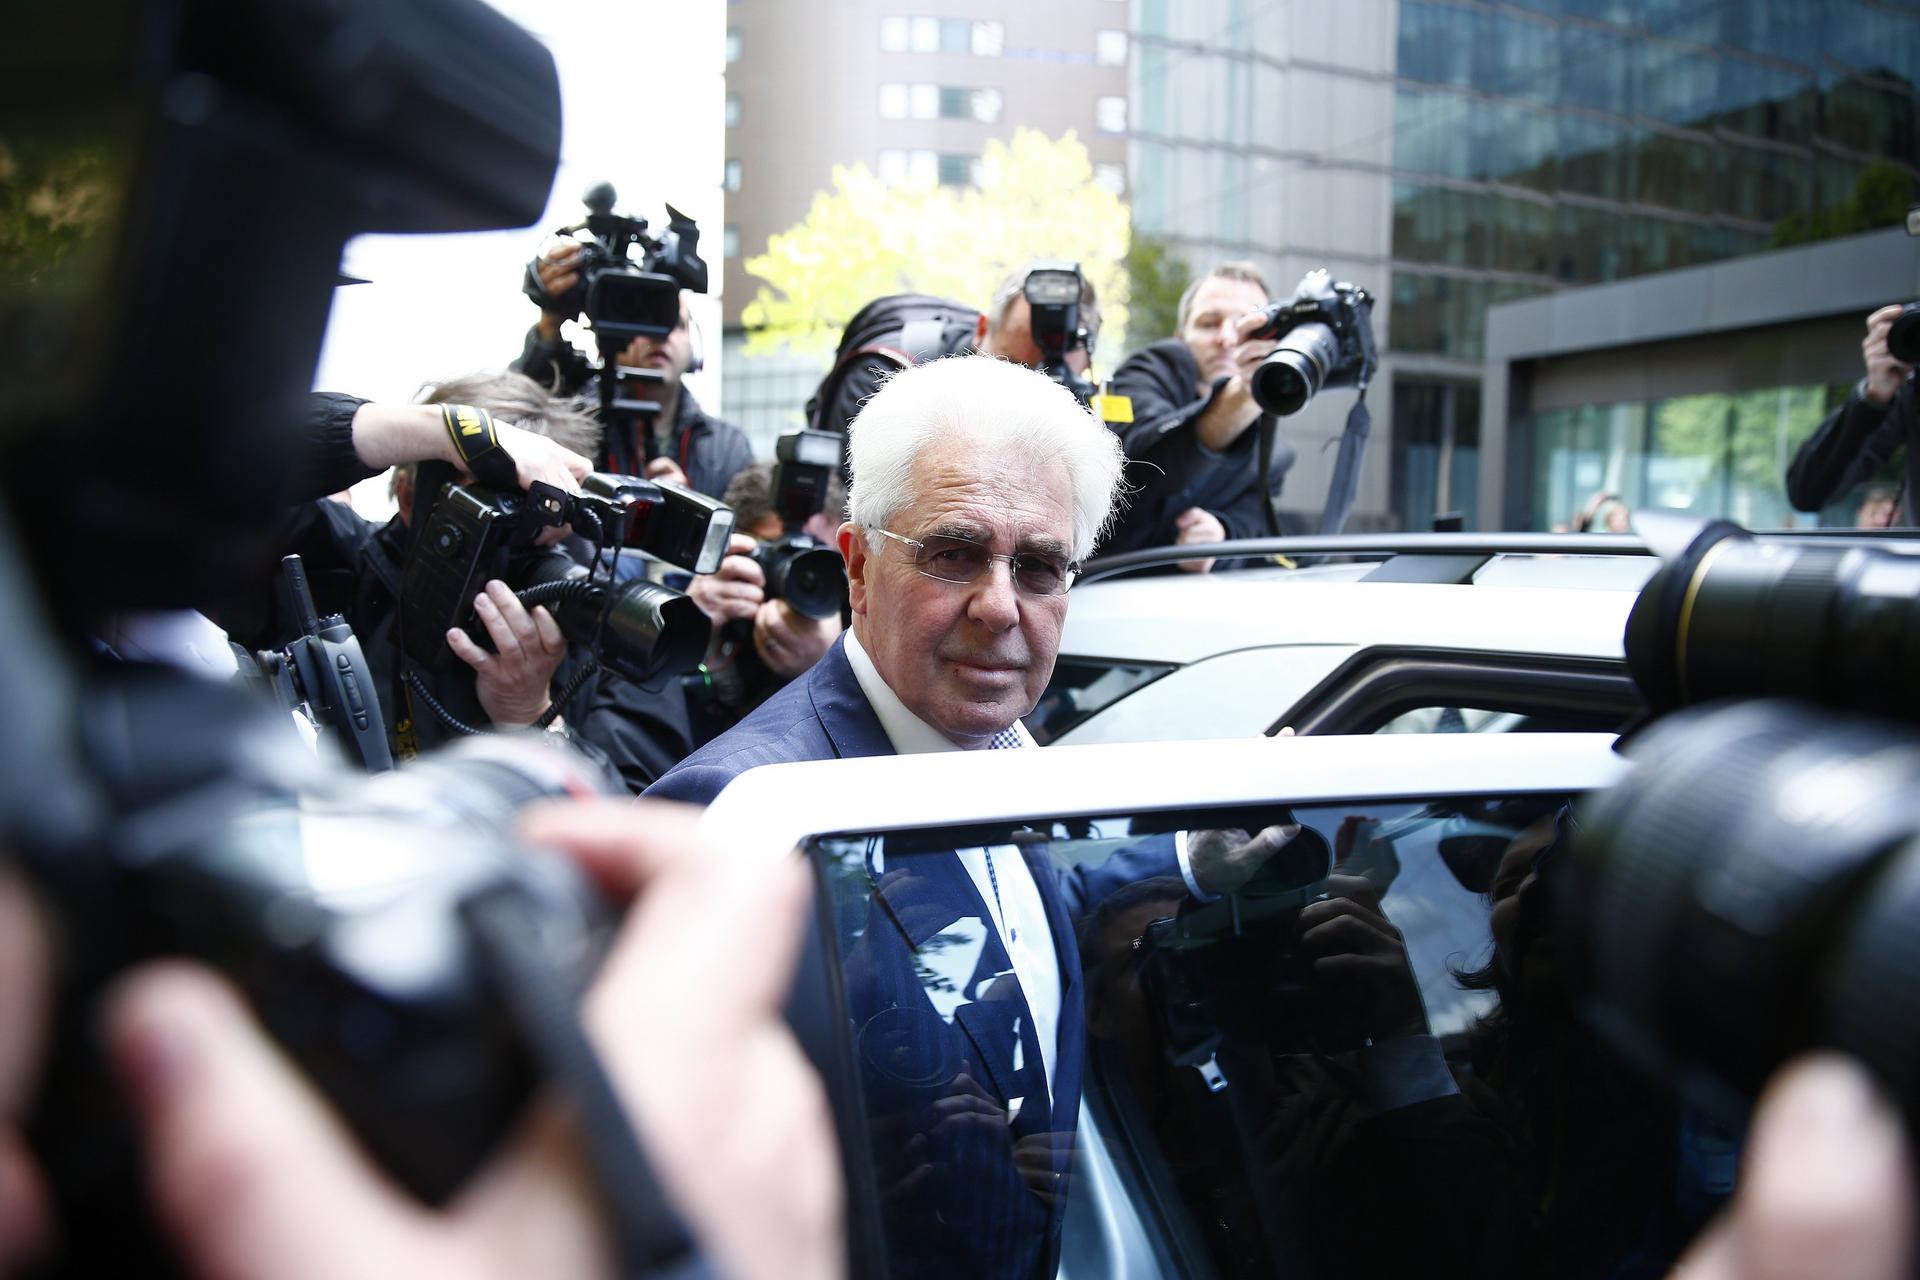 Max Clifford leaves court after being found guilty of indecently assaulting teenagers as young as 15. Photo: Reuters